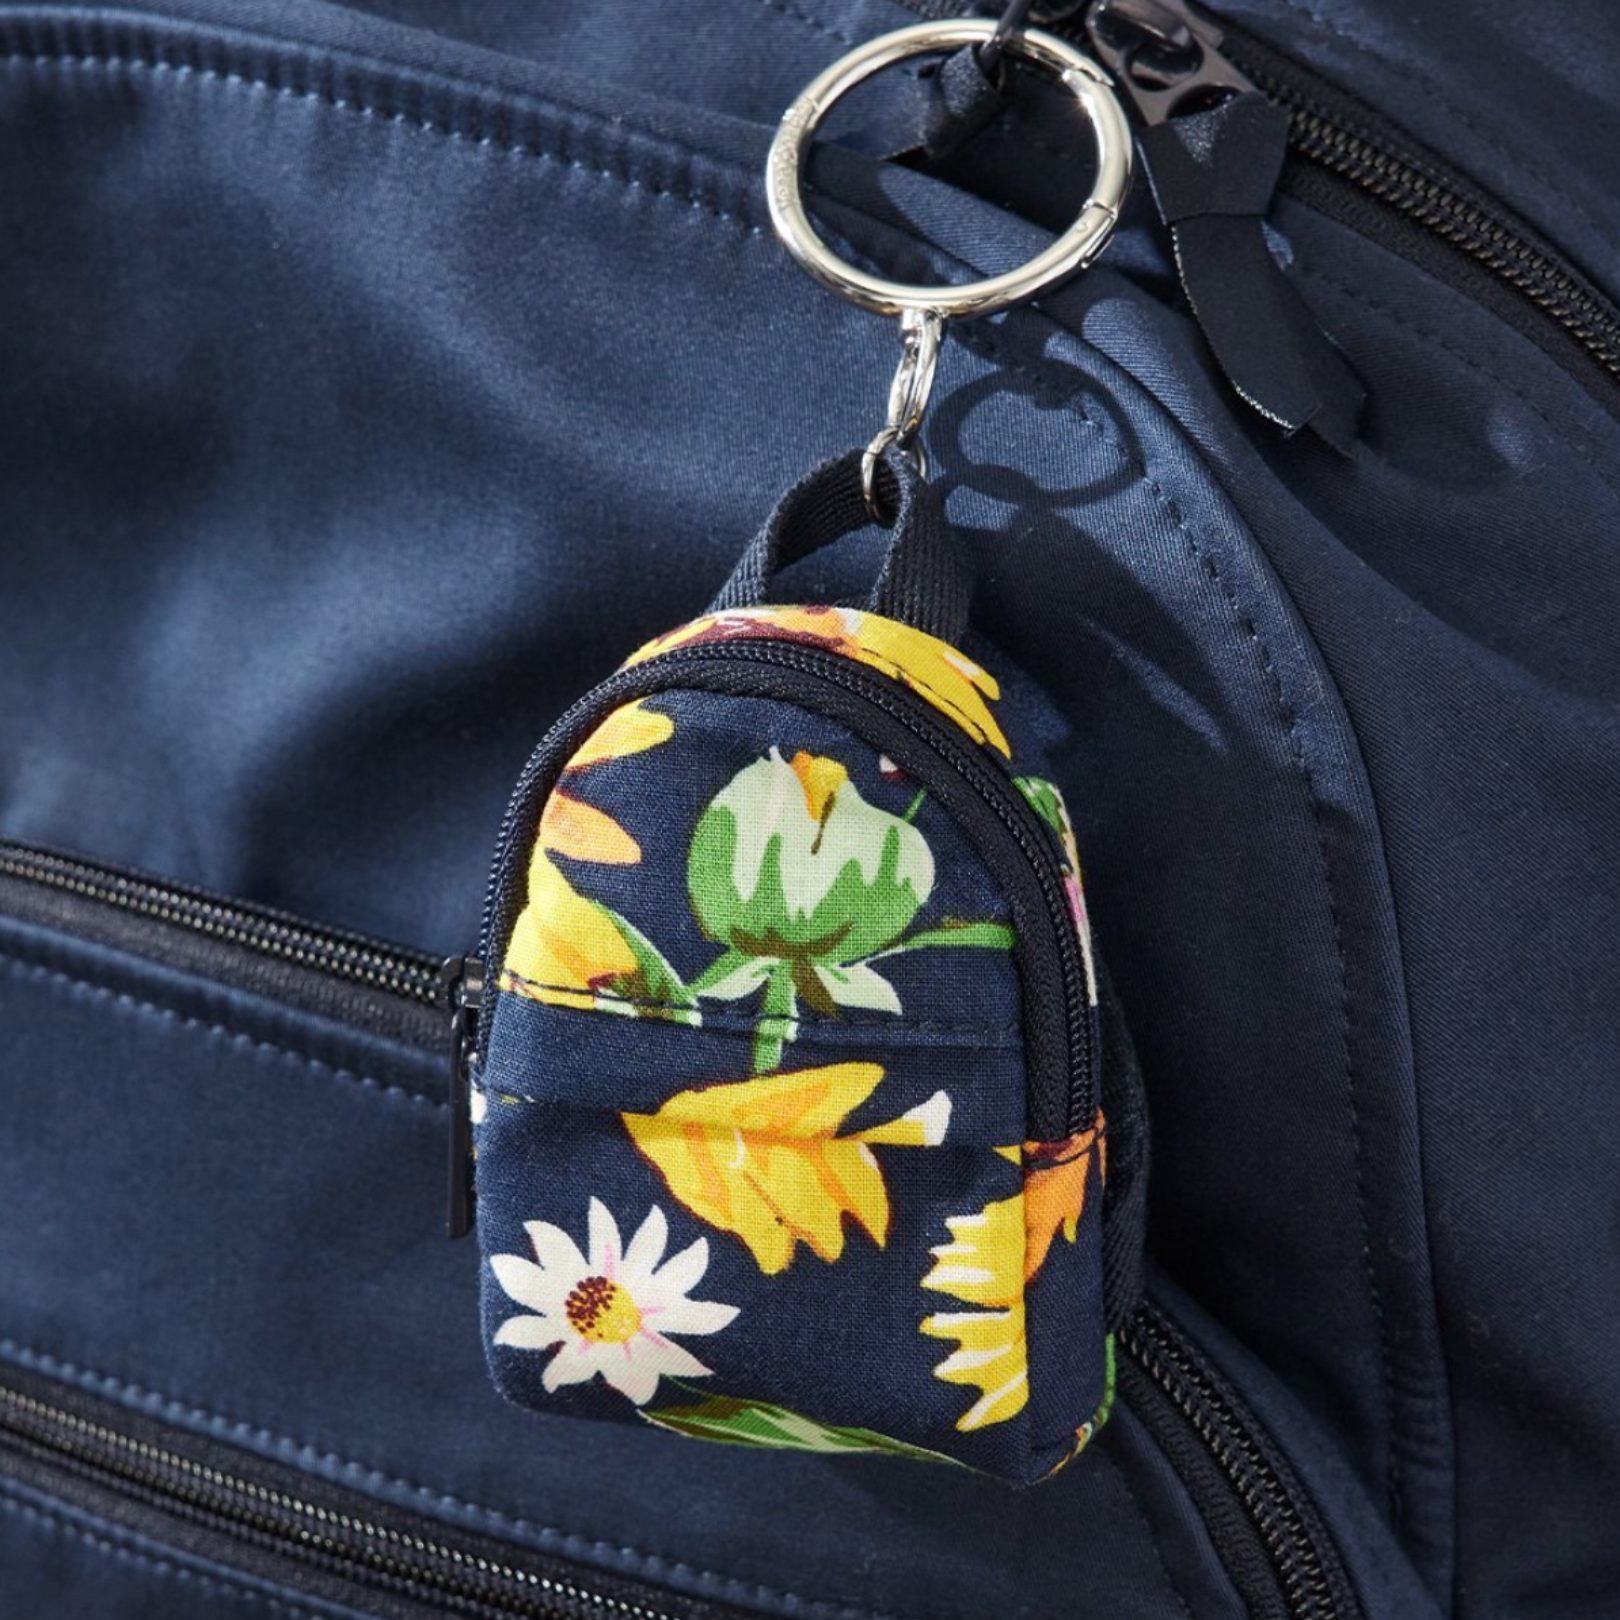 vera bradley Archives - Blessings in a Backpack